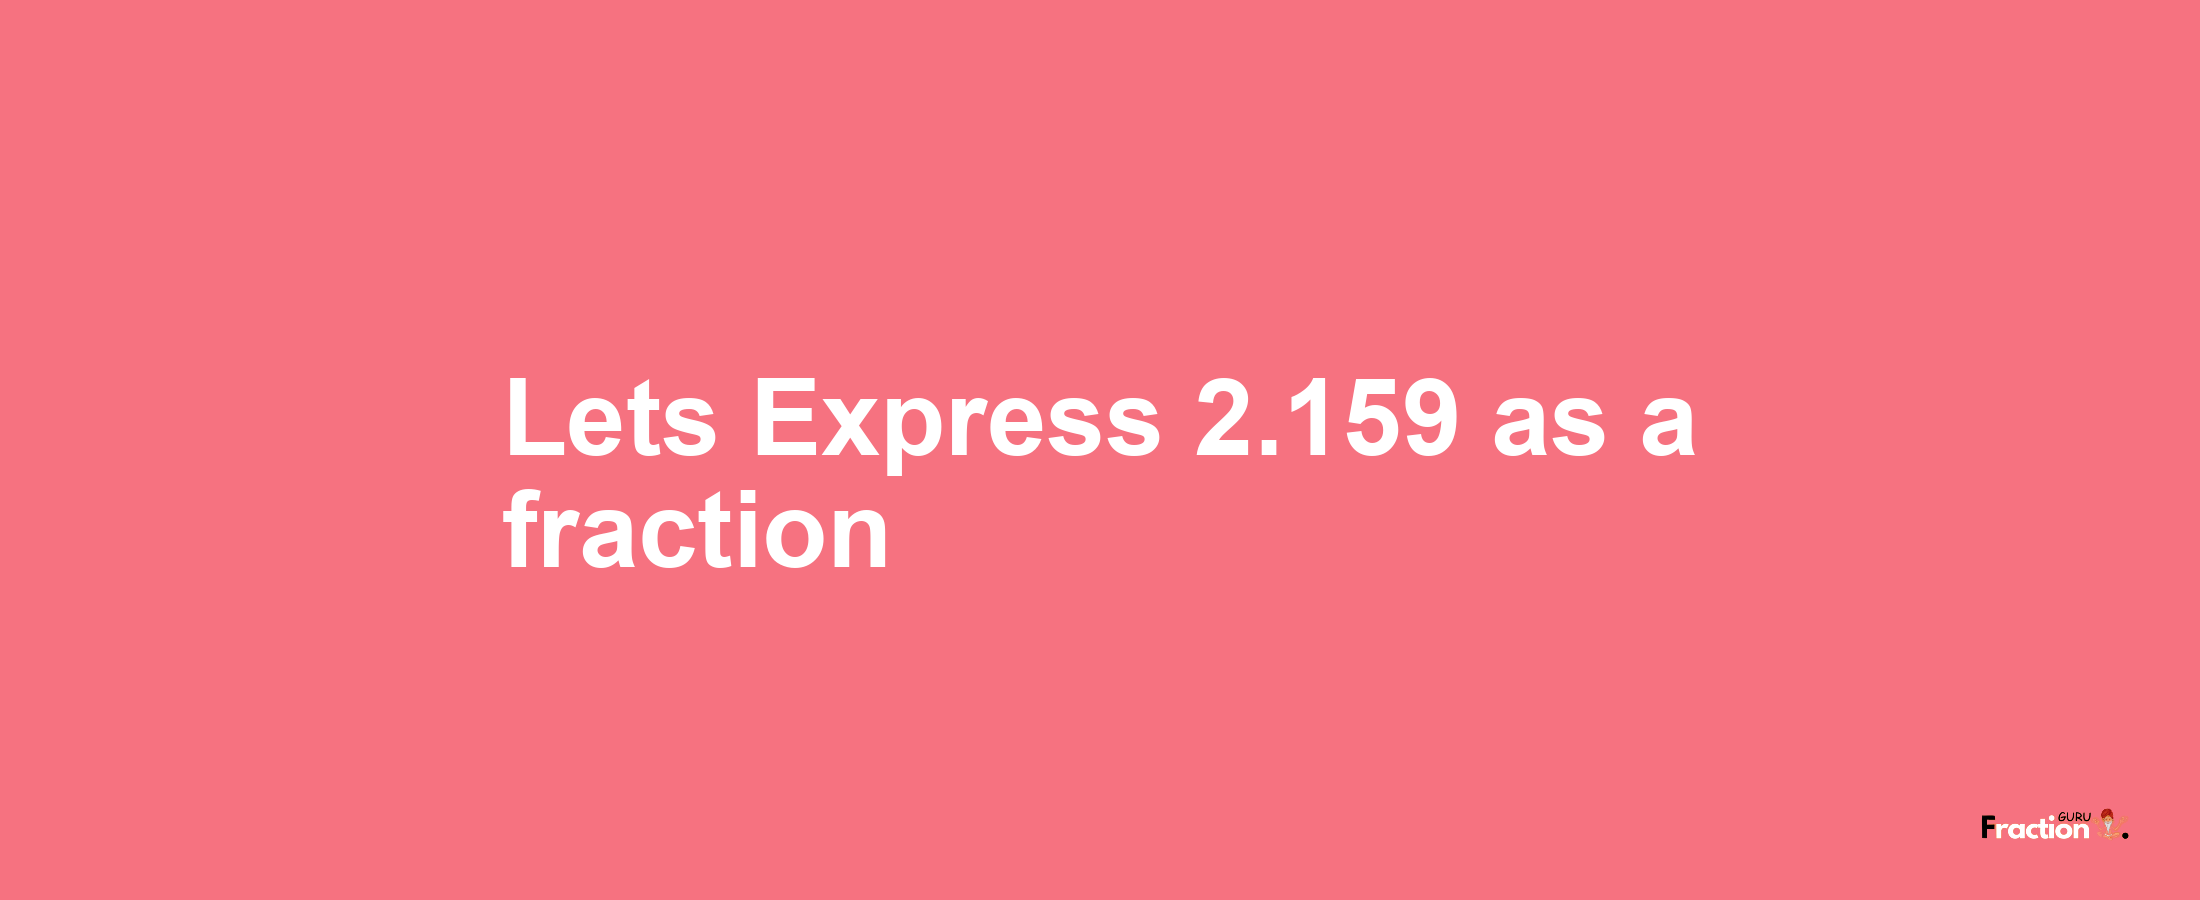 Lets Express 2.159 as afraction